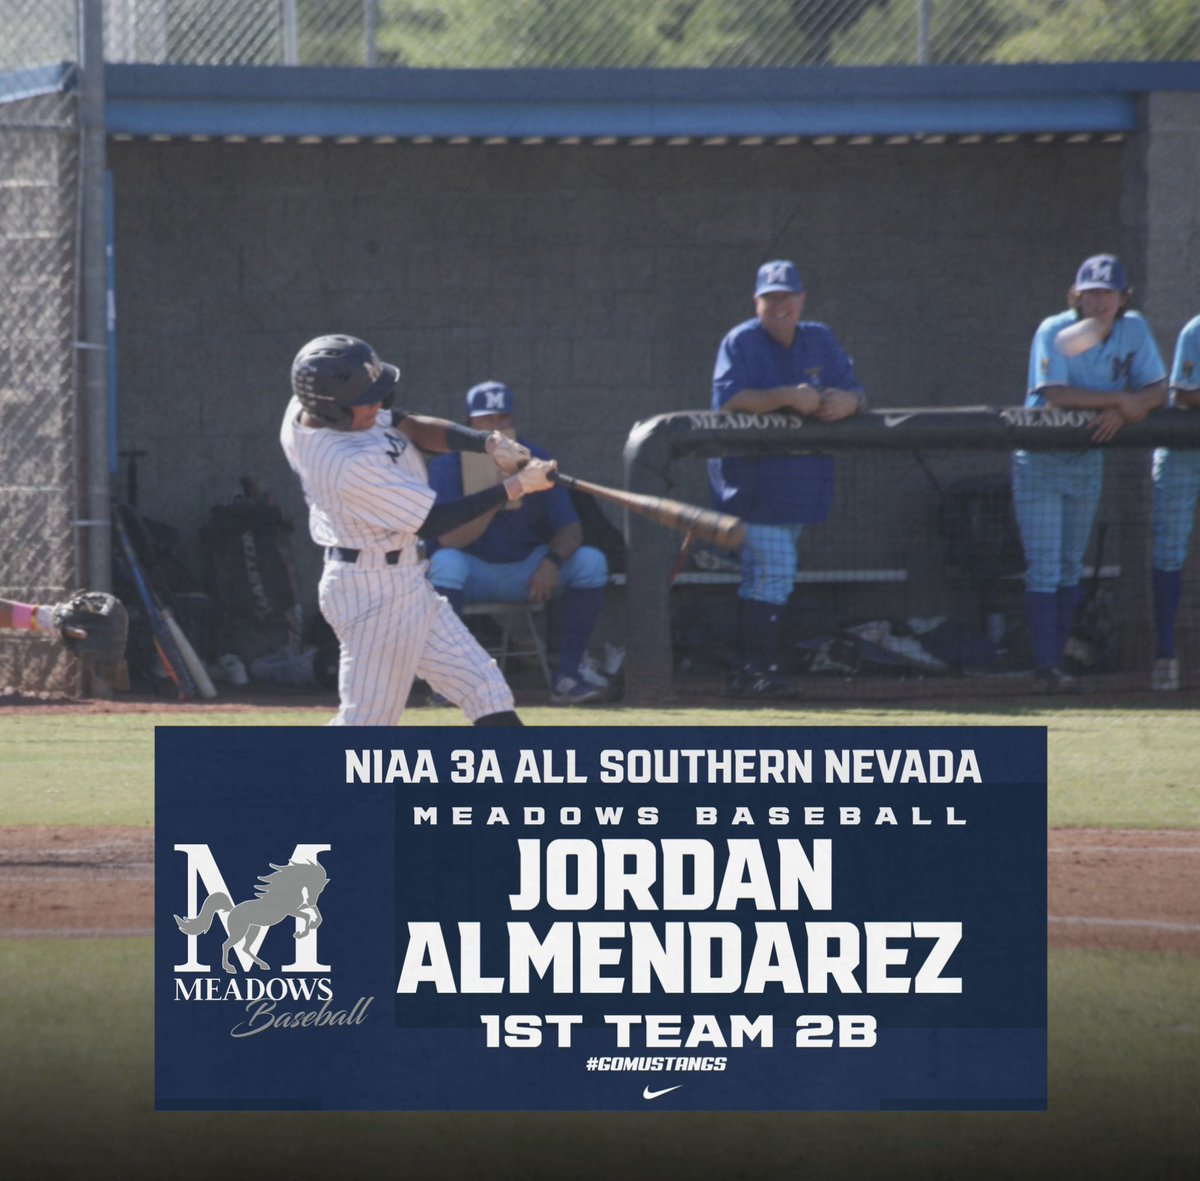 Congrats to Meadows Senior @Jordan_a_2 for being selected as the NIAA 3A All Southern Nevada 1st Team 2B. Great job Jordan! #allleague #GoMustangs #BigBlue #family #believe #ibelieve #Road2State #BandOfBrothers #Meadows #meadowsbaseball #lasvegas #baseball #MFRA #studentathlete